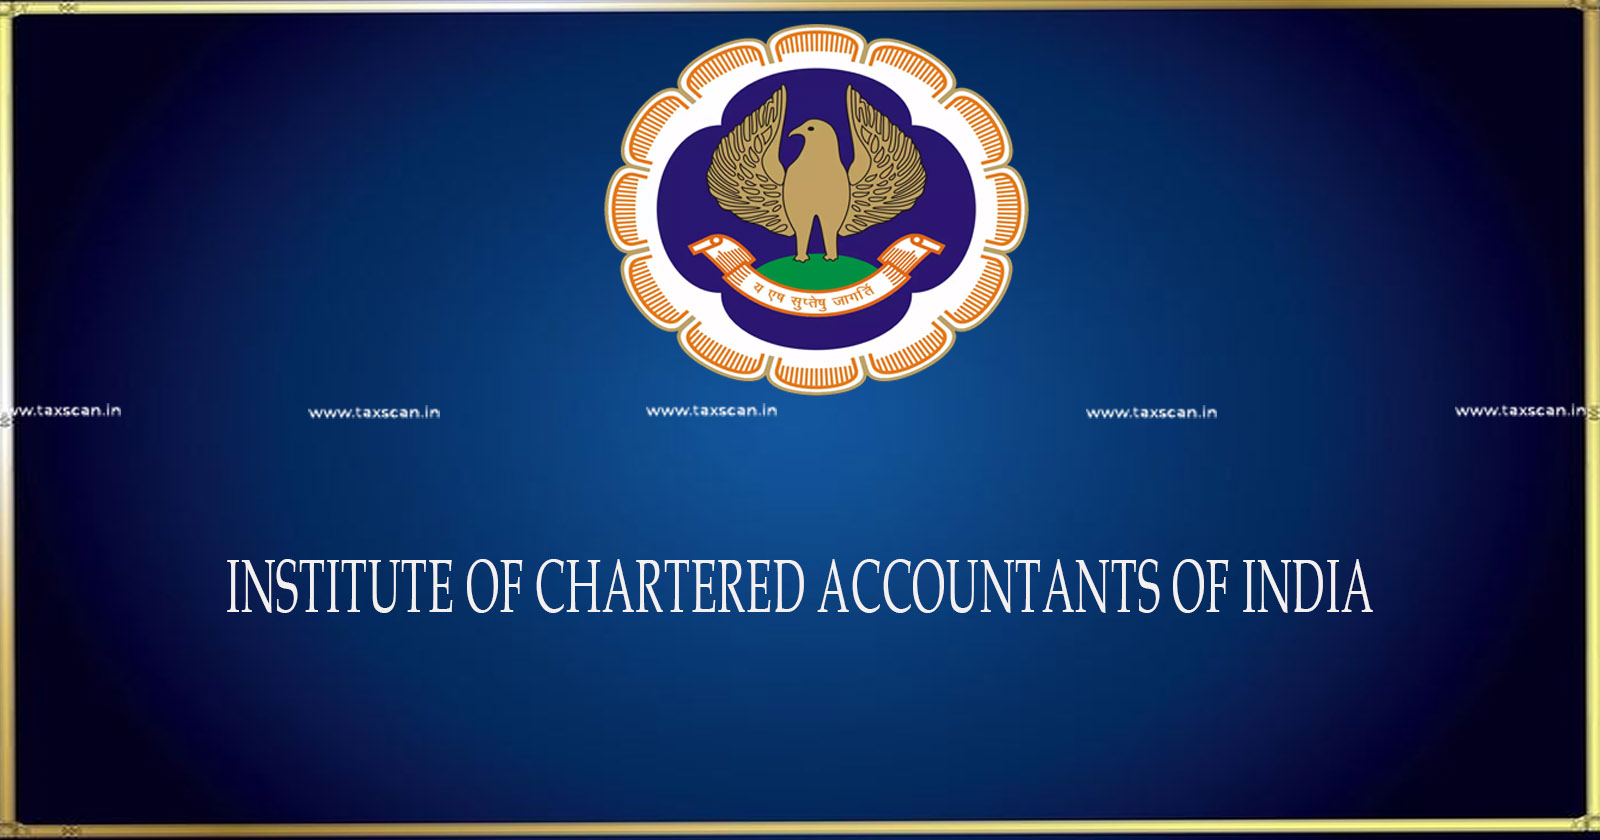 Minimum Fee by ICAI - ICAI - Institute of Chartered Accountants of India - Steps To Determine Minimum Fee By ICAI - Determining Minimum Fee By ICAI - How To Determine Minimum Fee By ICAI - TAXSCAN